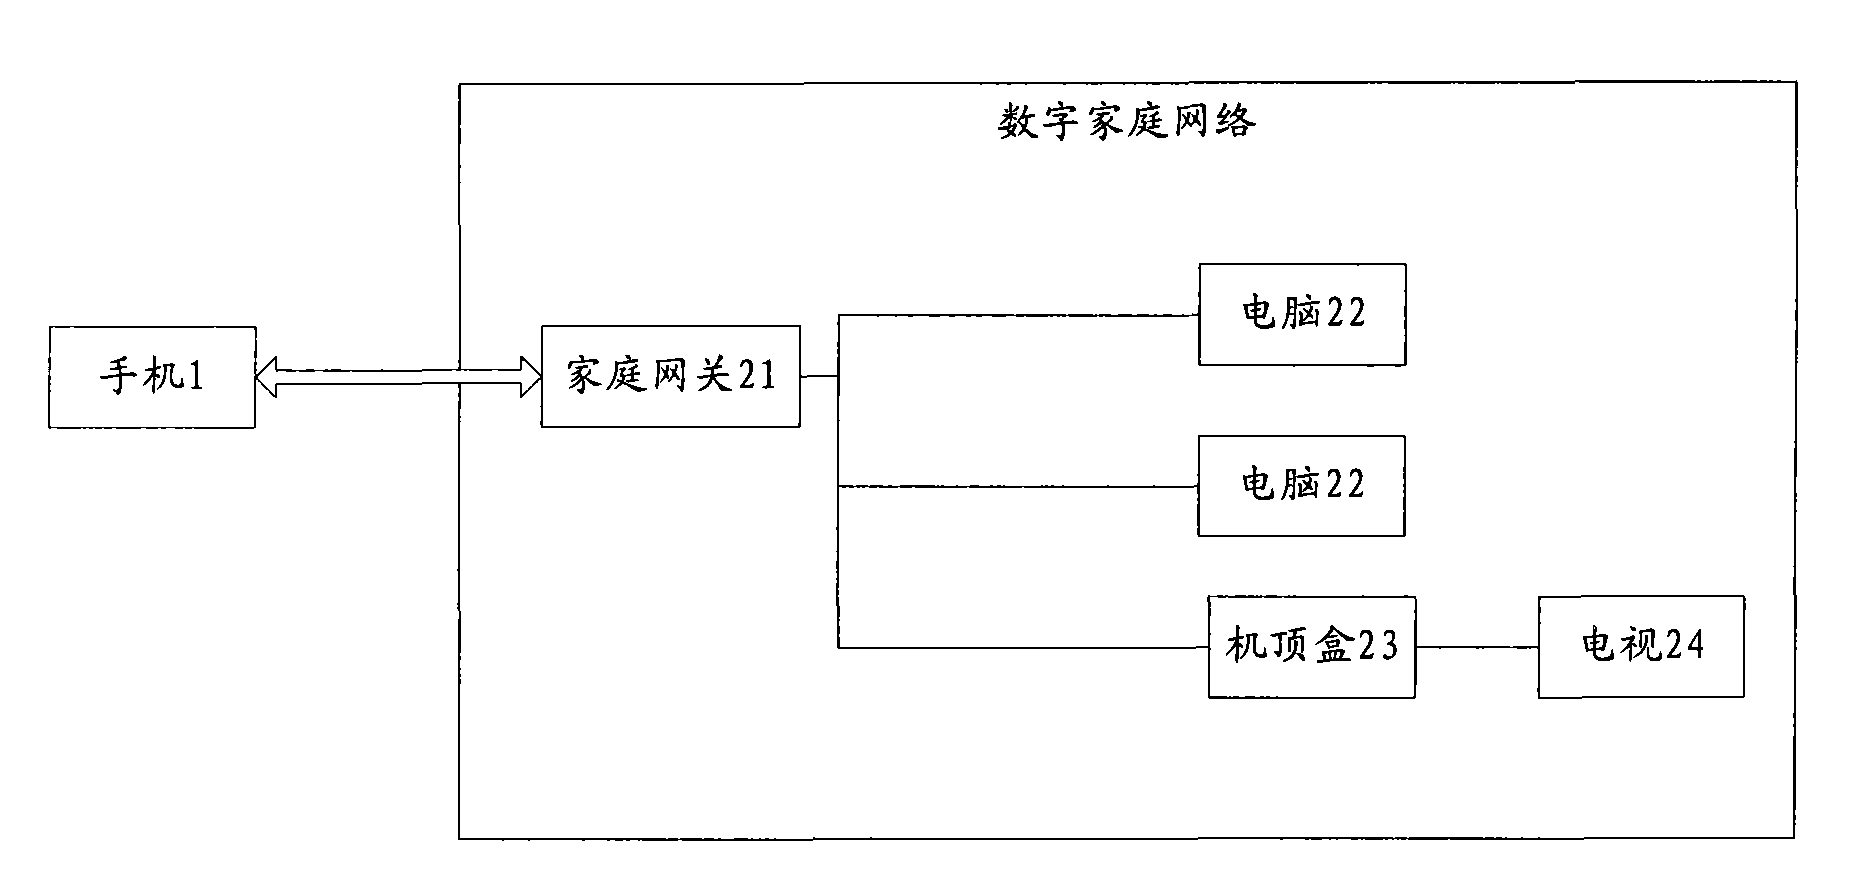 Local area network system for realizing streaming media switch among peer-to-peer devices and realization method thereof